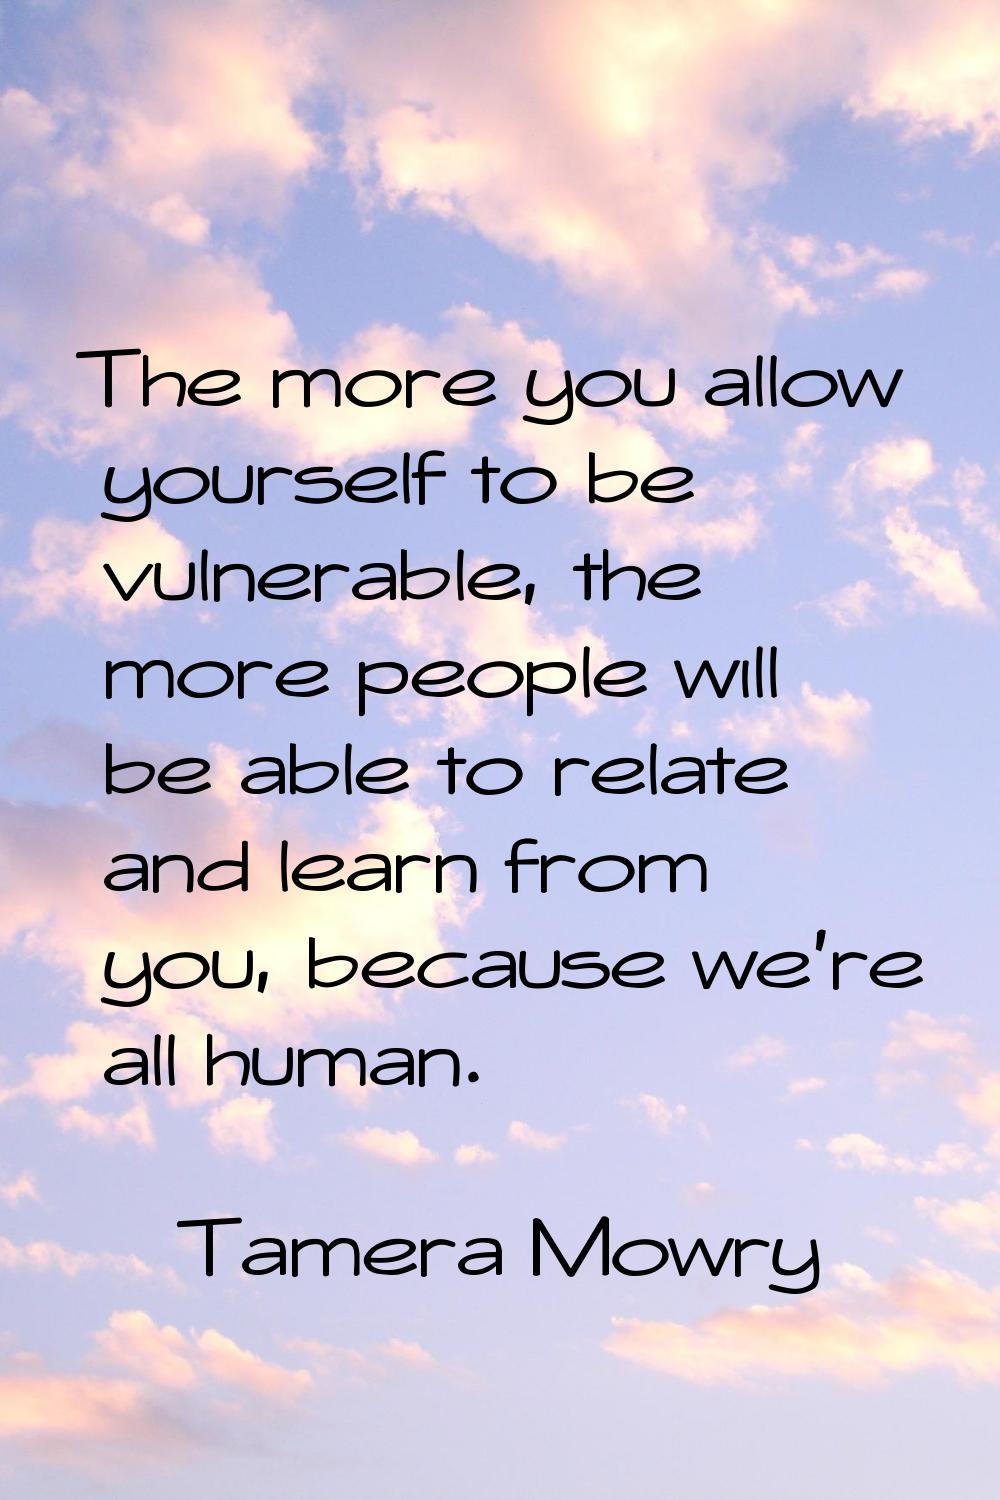 The more you allow yourself to be vulnerable, the more people will be able to relate and learn from